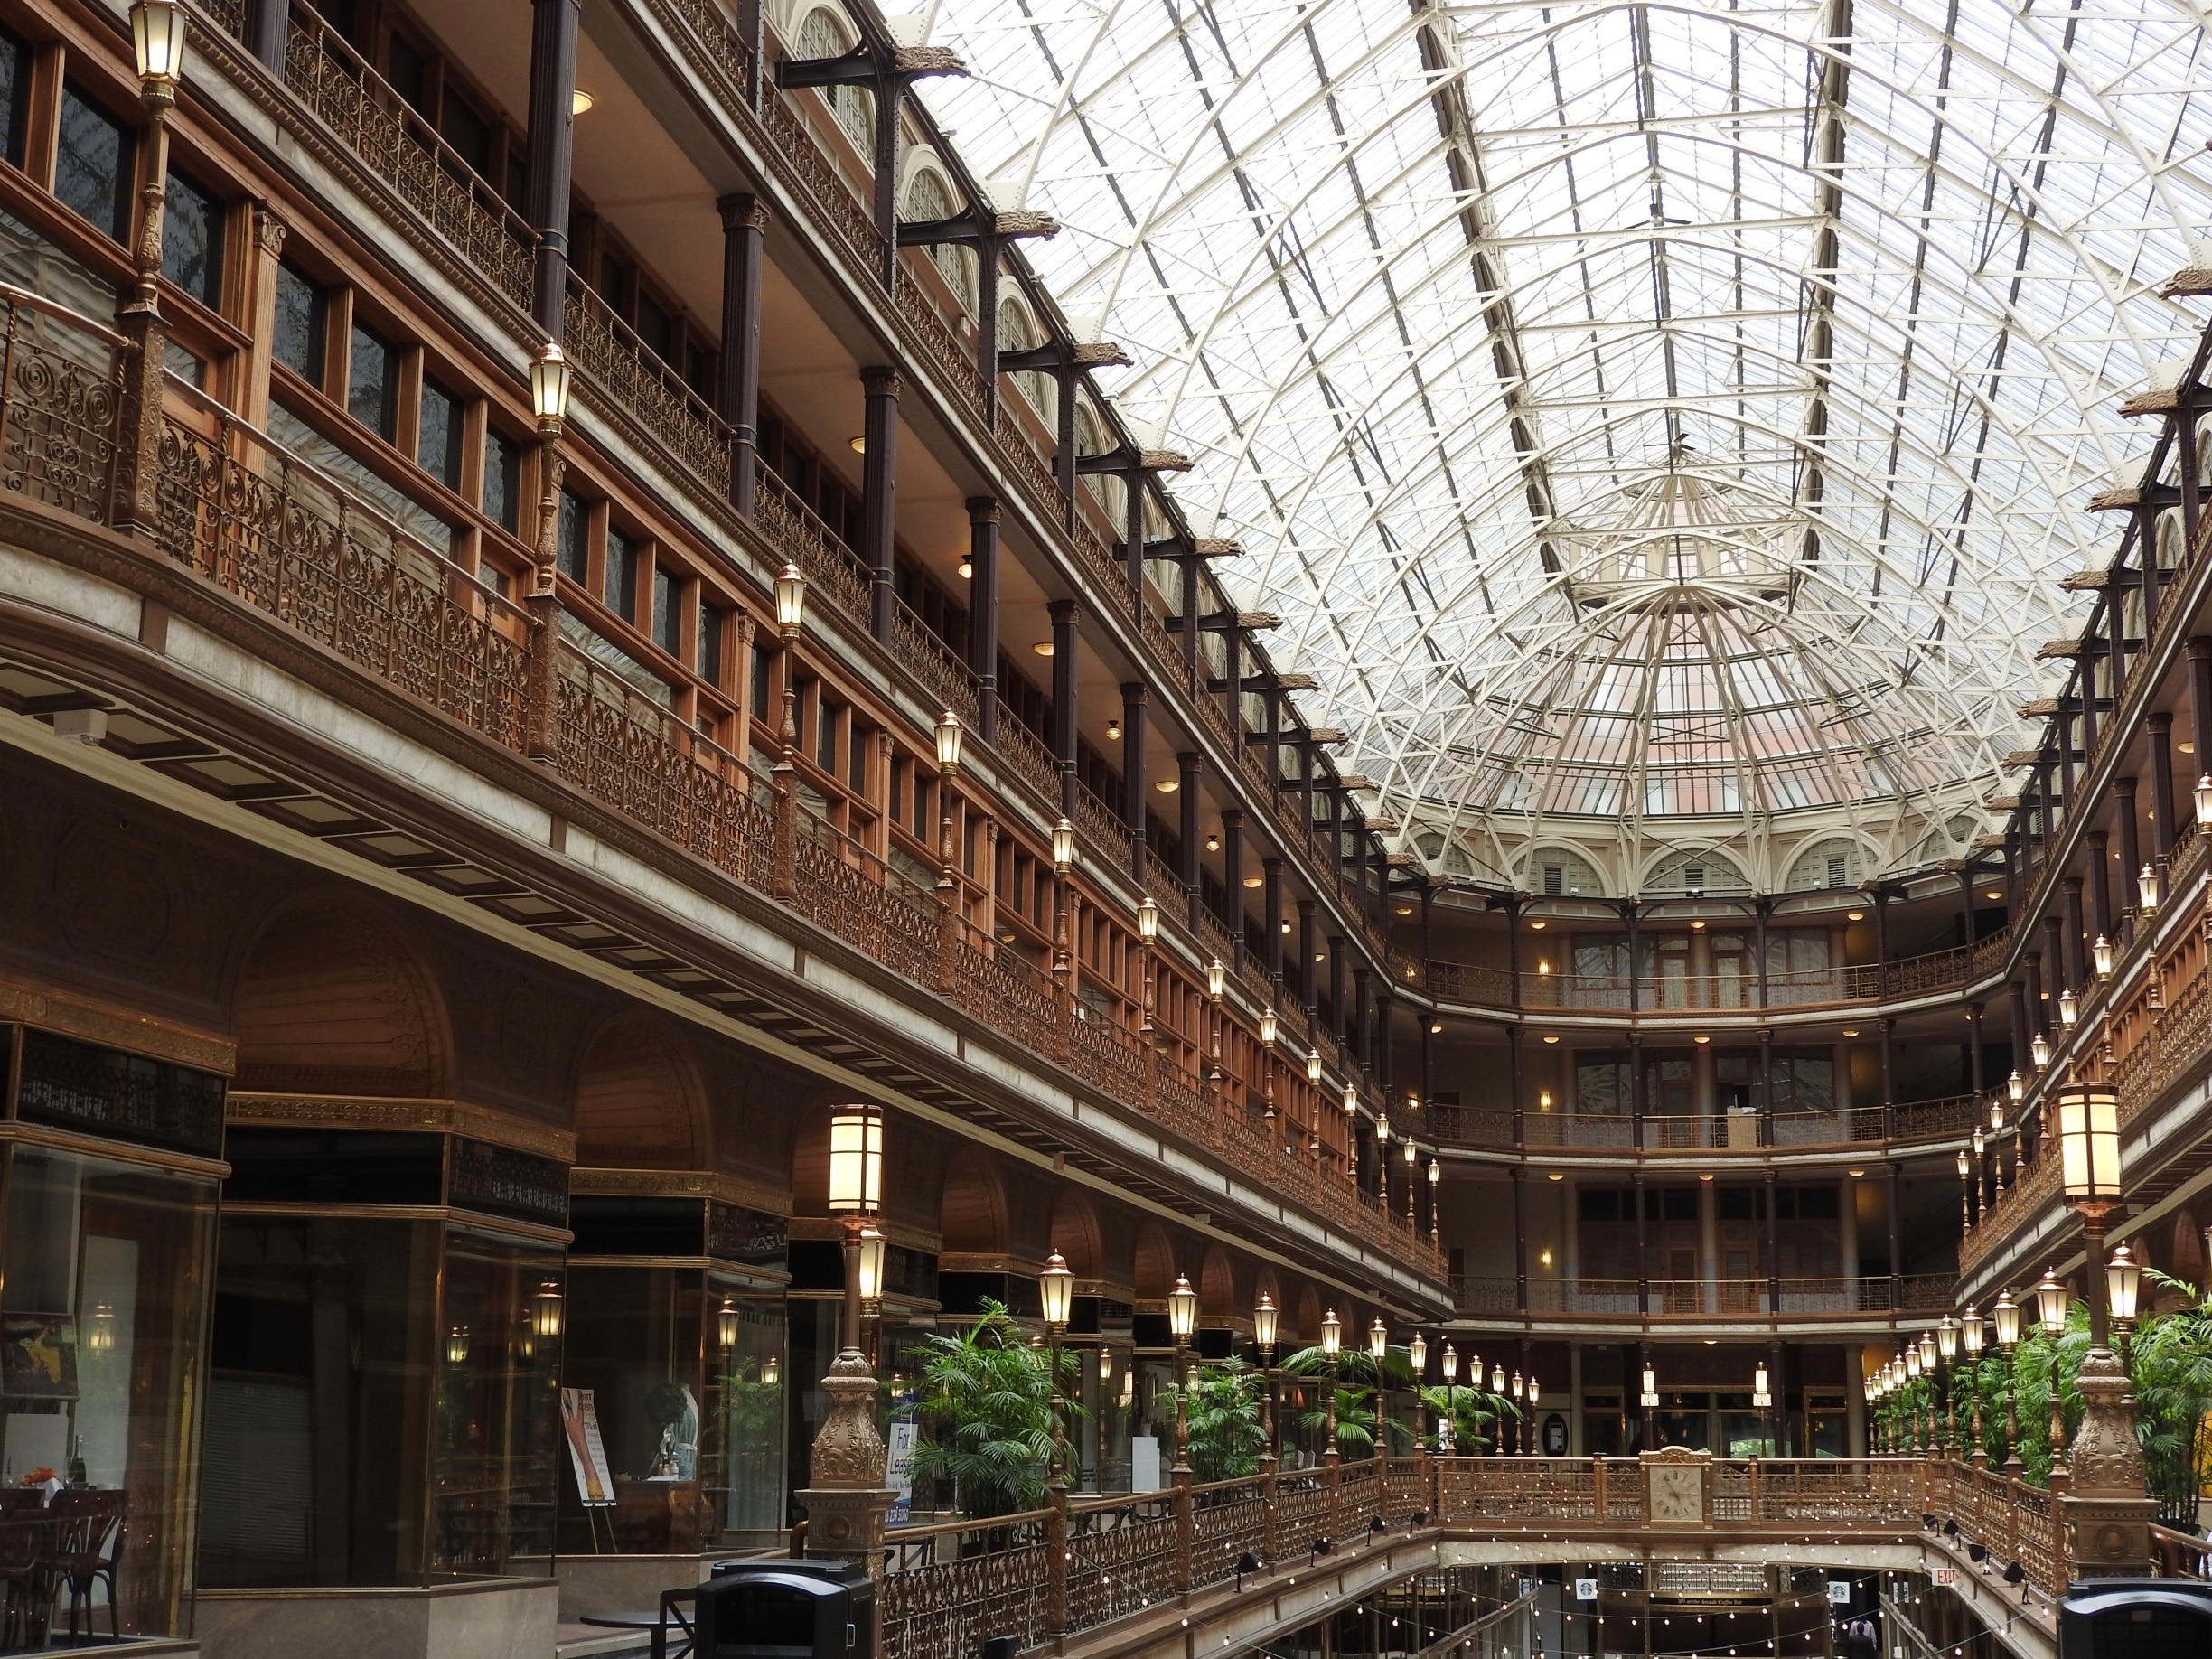 The Arcade in downtown Cleveland, Ohio, is a Victorian-era structure of two nine-story buildings, joined by a five-story arcade with a glass skylight spanning over 300 feet, along the four balconies. Wikipedia

#Cleveland #skylight
#TroveOnTuesday #Trovember